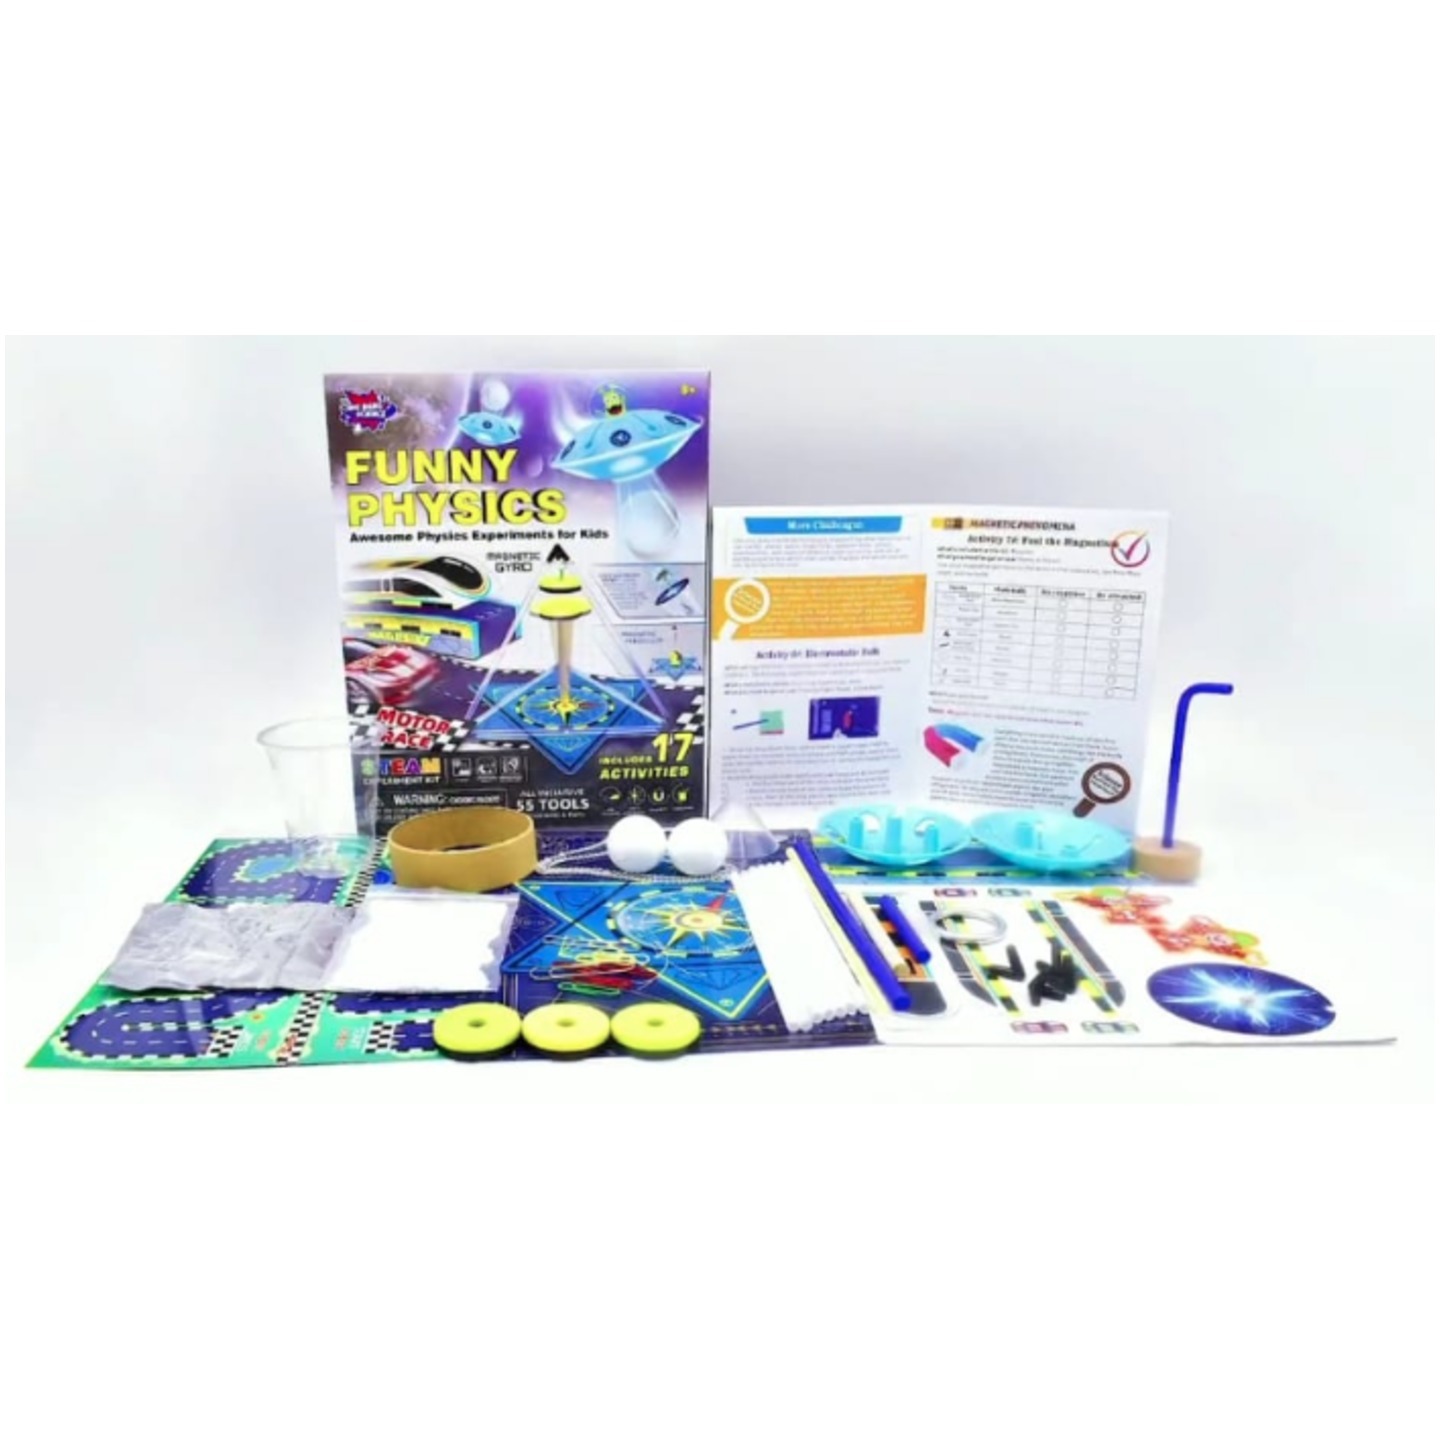 STEM Big Bang Science Experiments on Physics for Kids Learning Teaching Resource Learning Aid